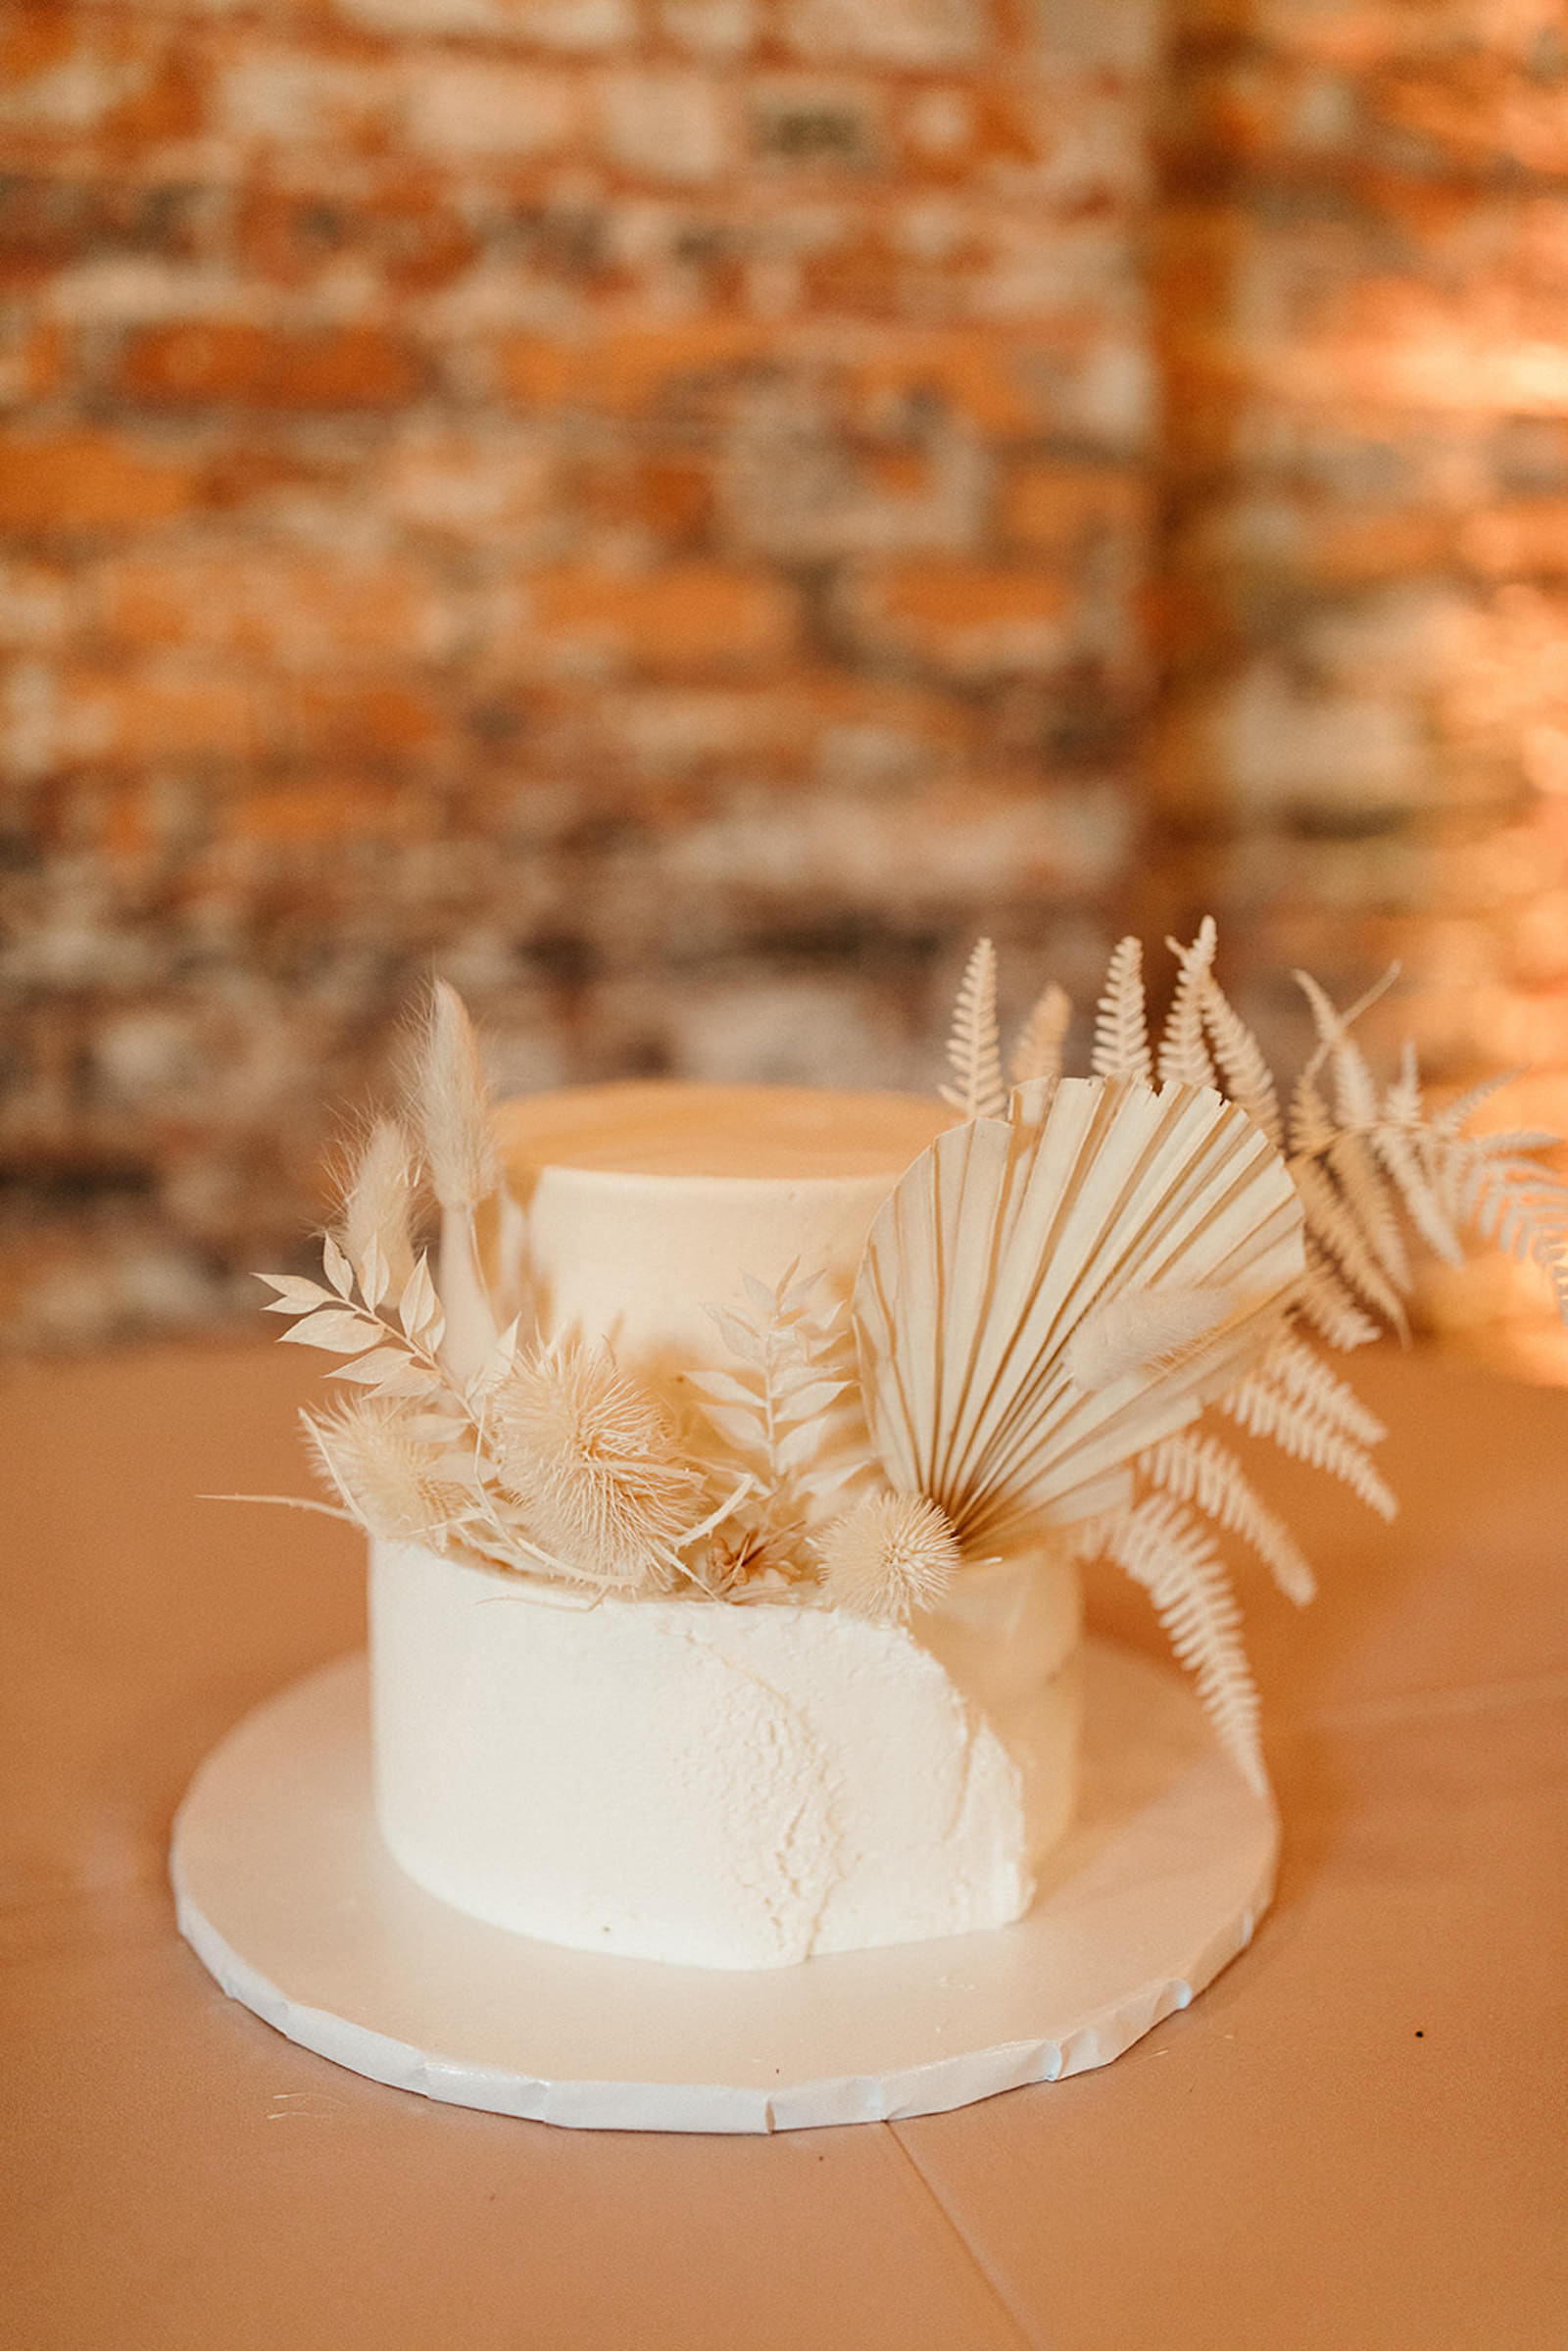 Earthy Neutral Boho Modern Chic Wedding, Two Tier White Wedding Cake with Dried Leaves | Tampa Bay Wedding Florist Save the Date Florida